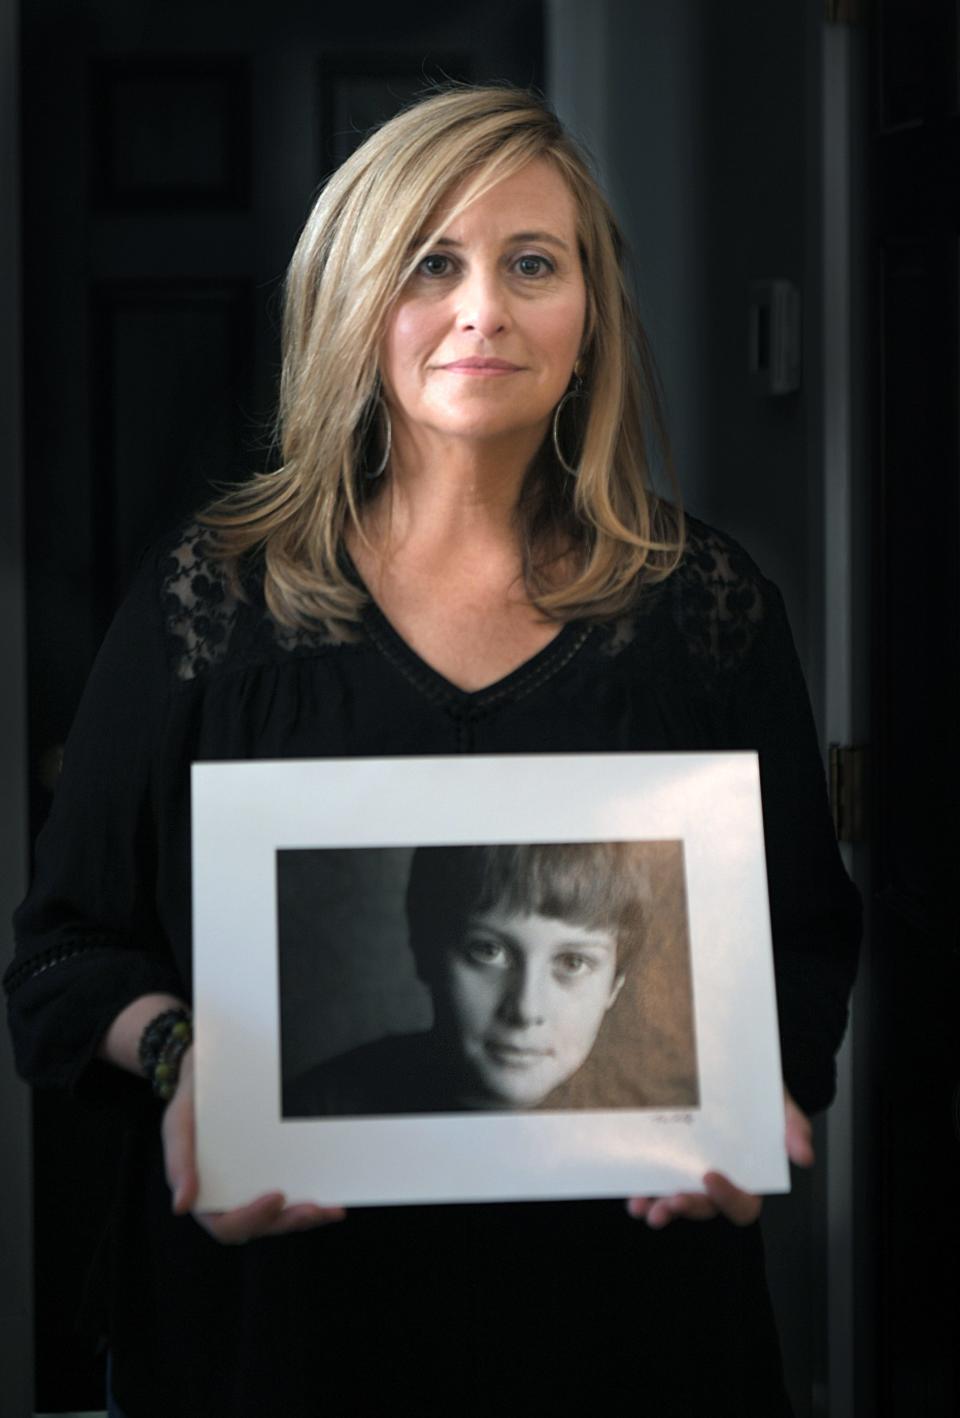 Former Mayor Megan Barry holds on her favorite childhood photograph of her son, Max, in her Nashville home on Thursday, August 22, 2019.  Max Barry died of a drug overdose at the age of 22.